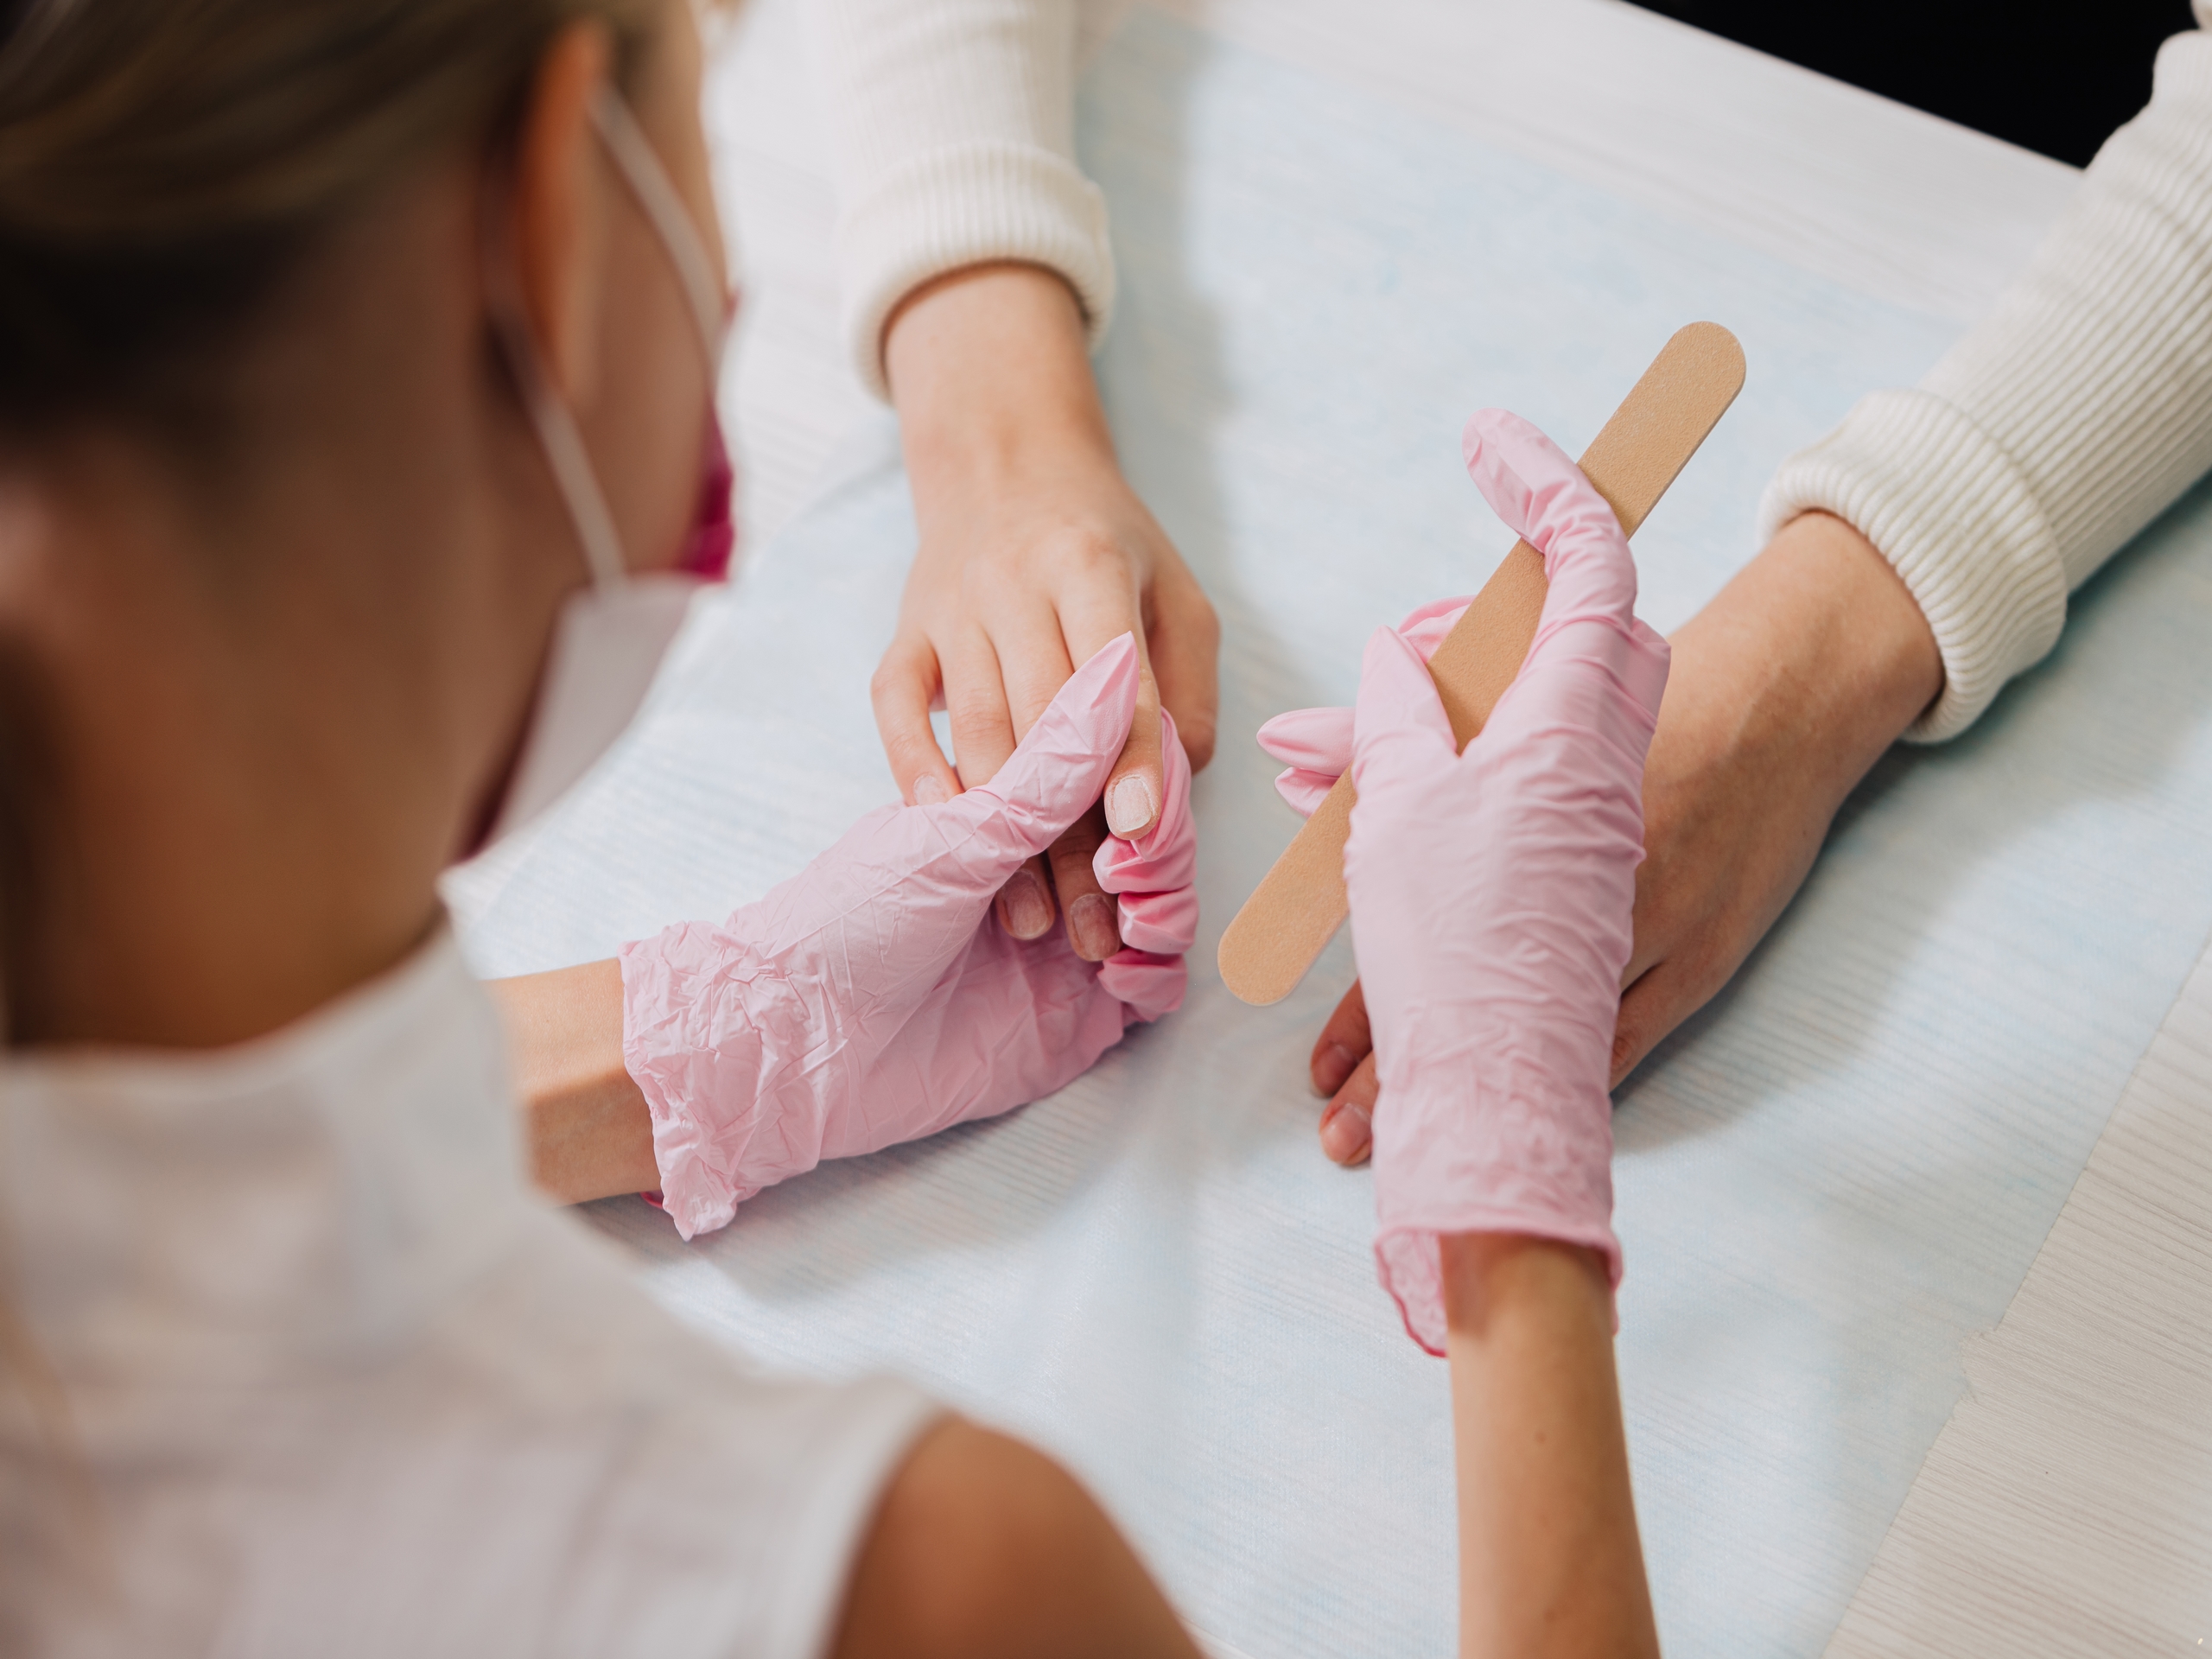 Manicure process. A master in pink rubber gloves processes the nails with a nail file. Female hands close up.